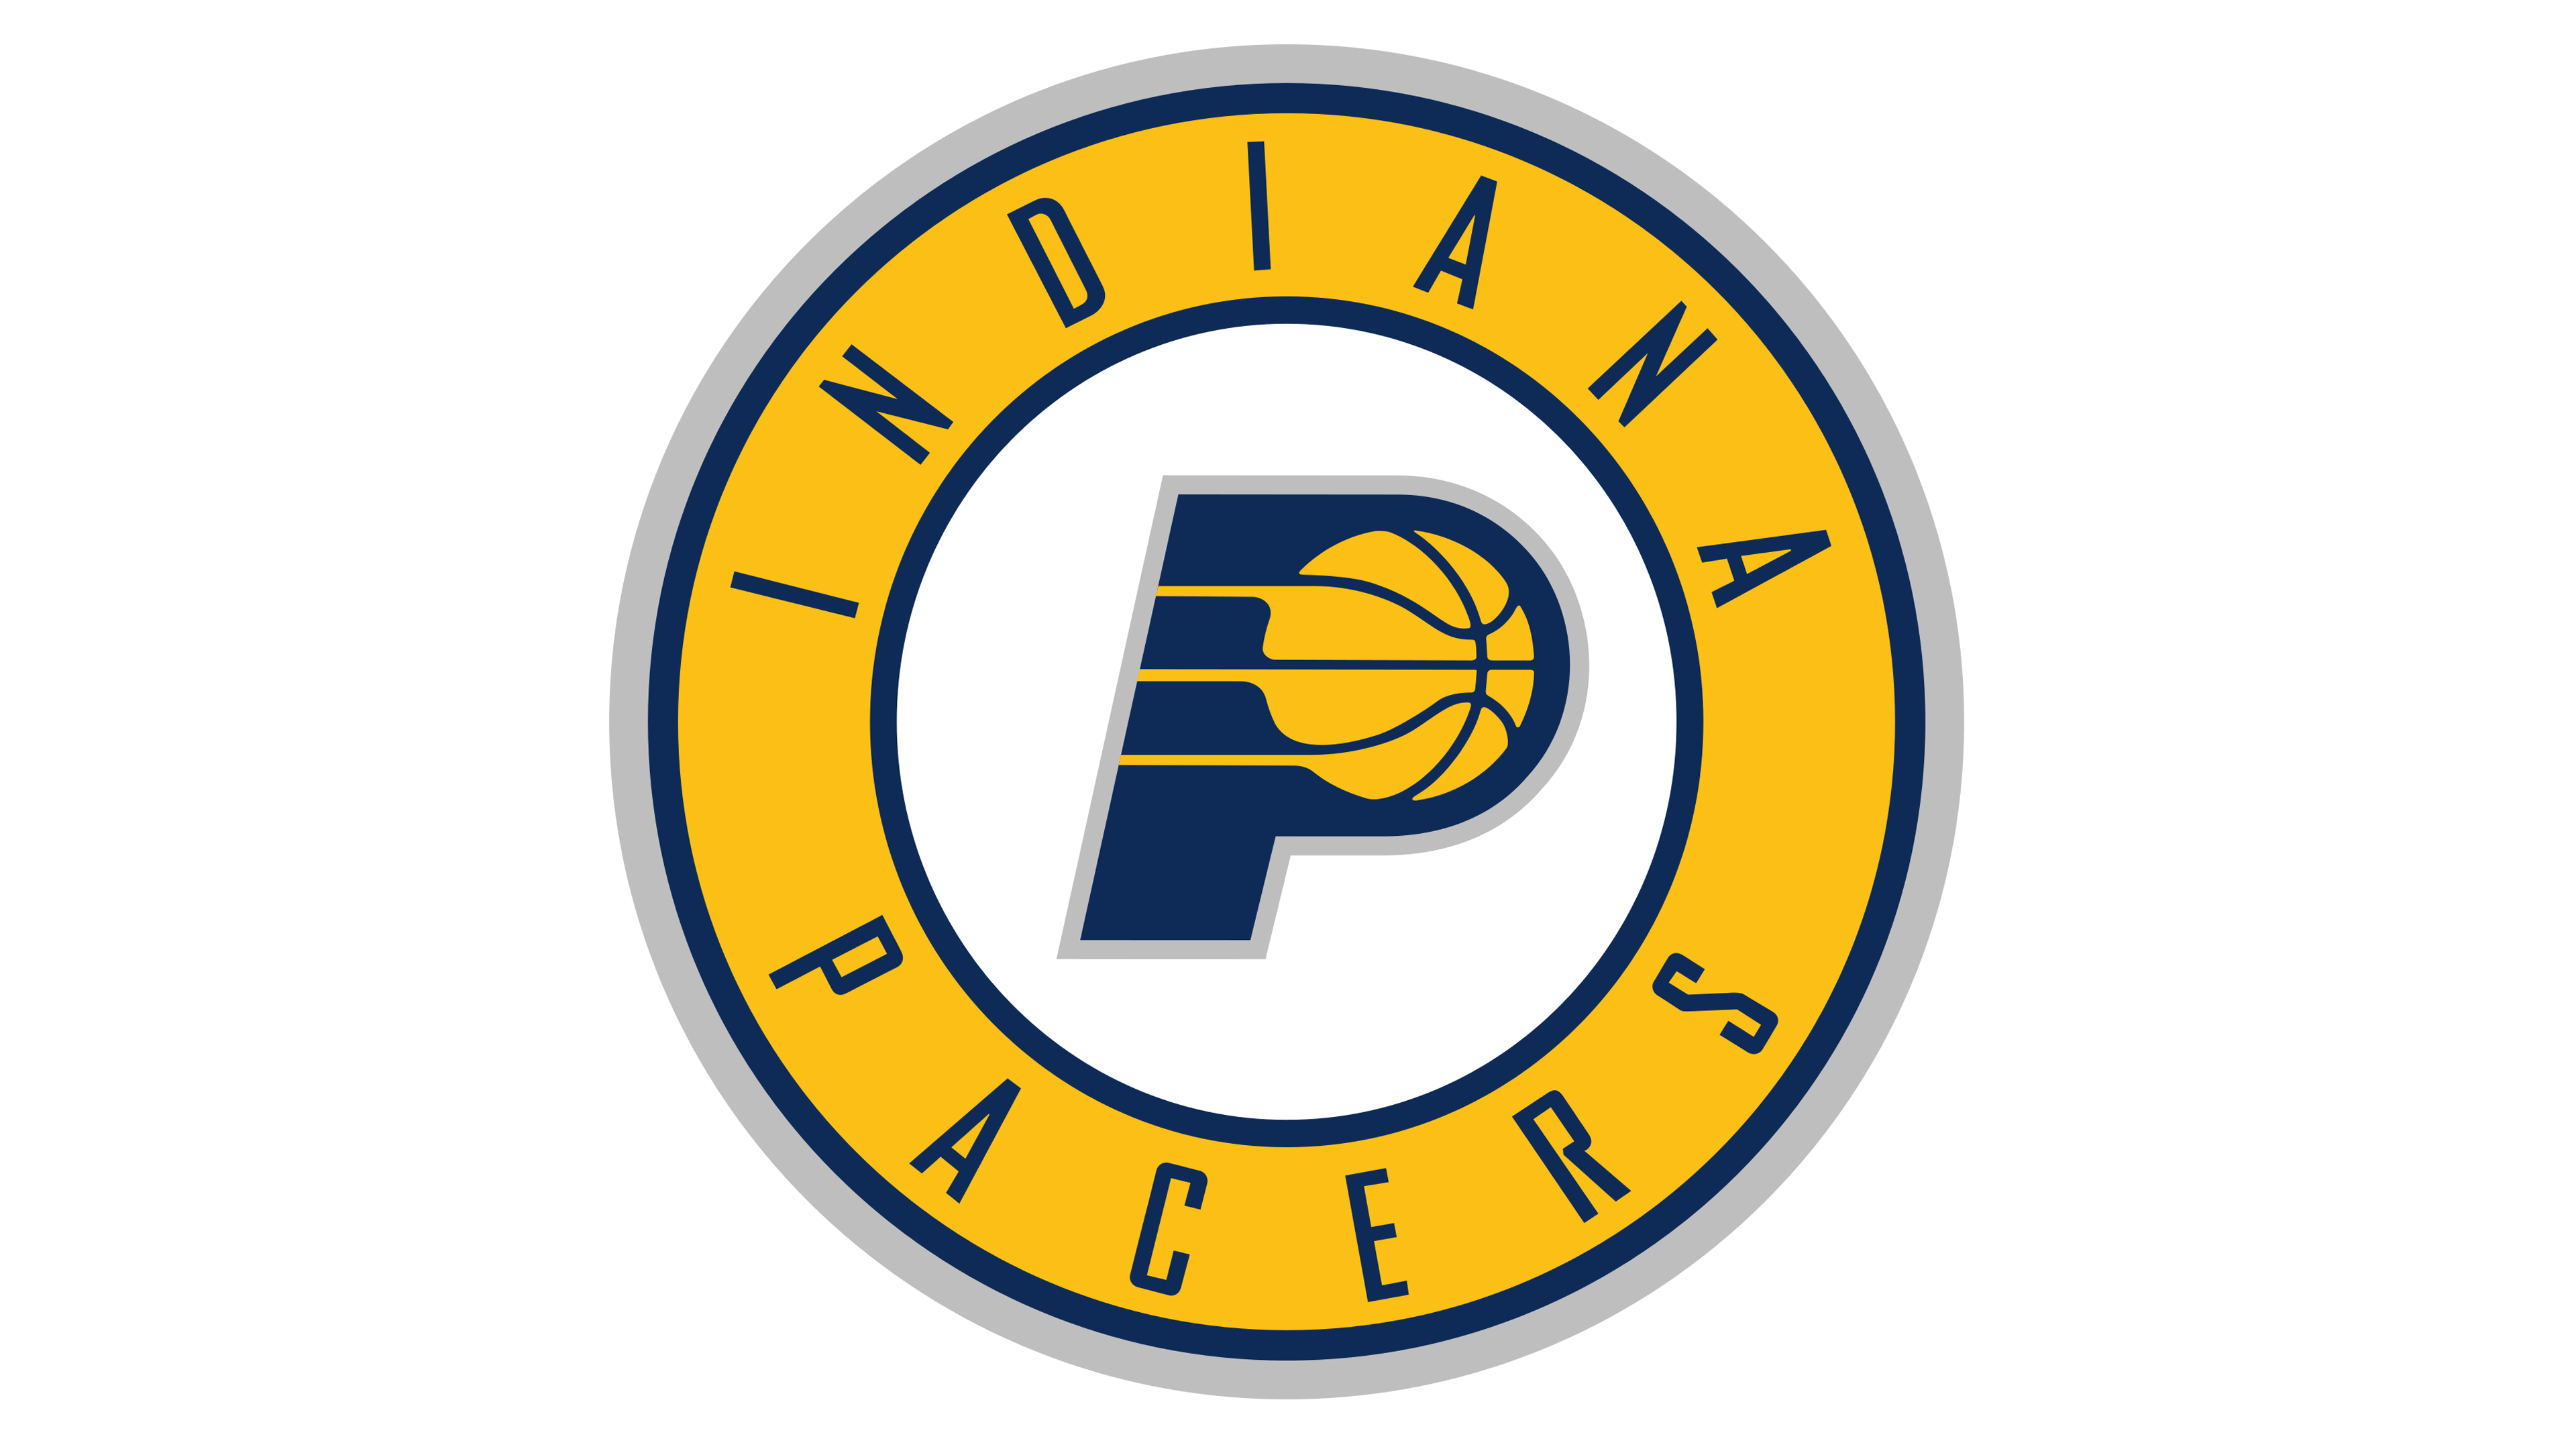 Indiana Logo - Indiana Pacers logo - Interesting History of the Team Name and emblem